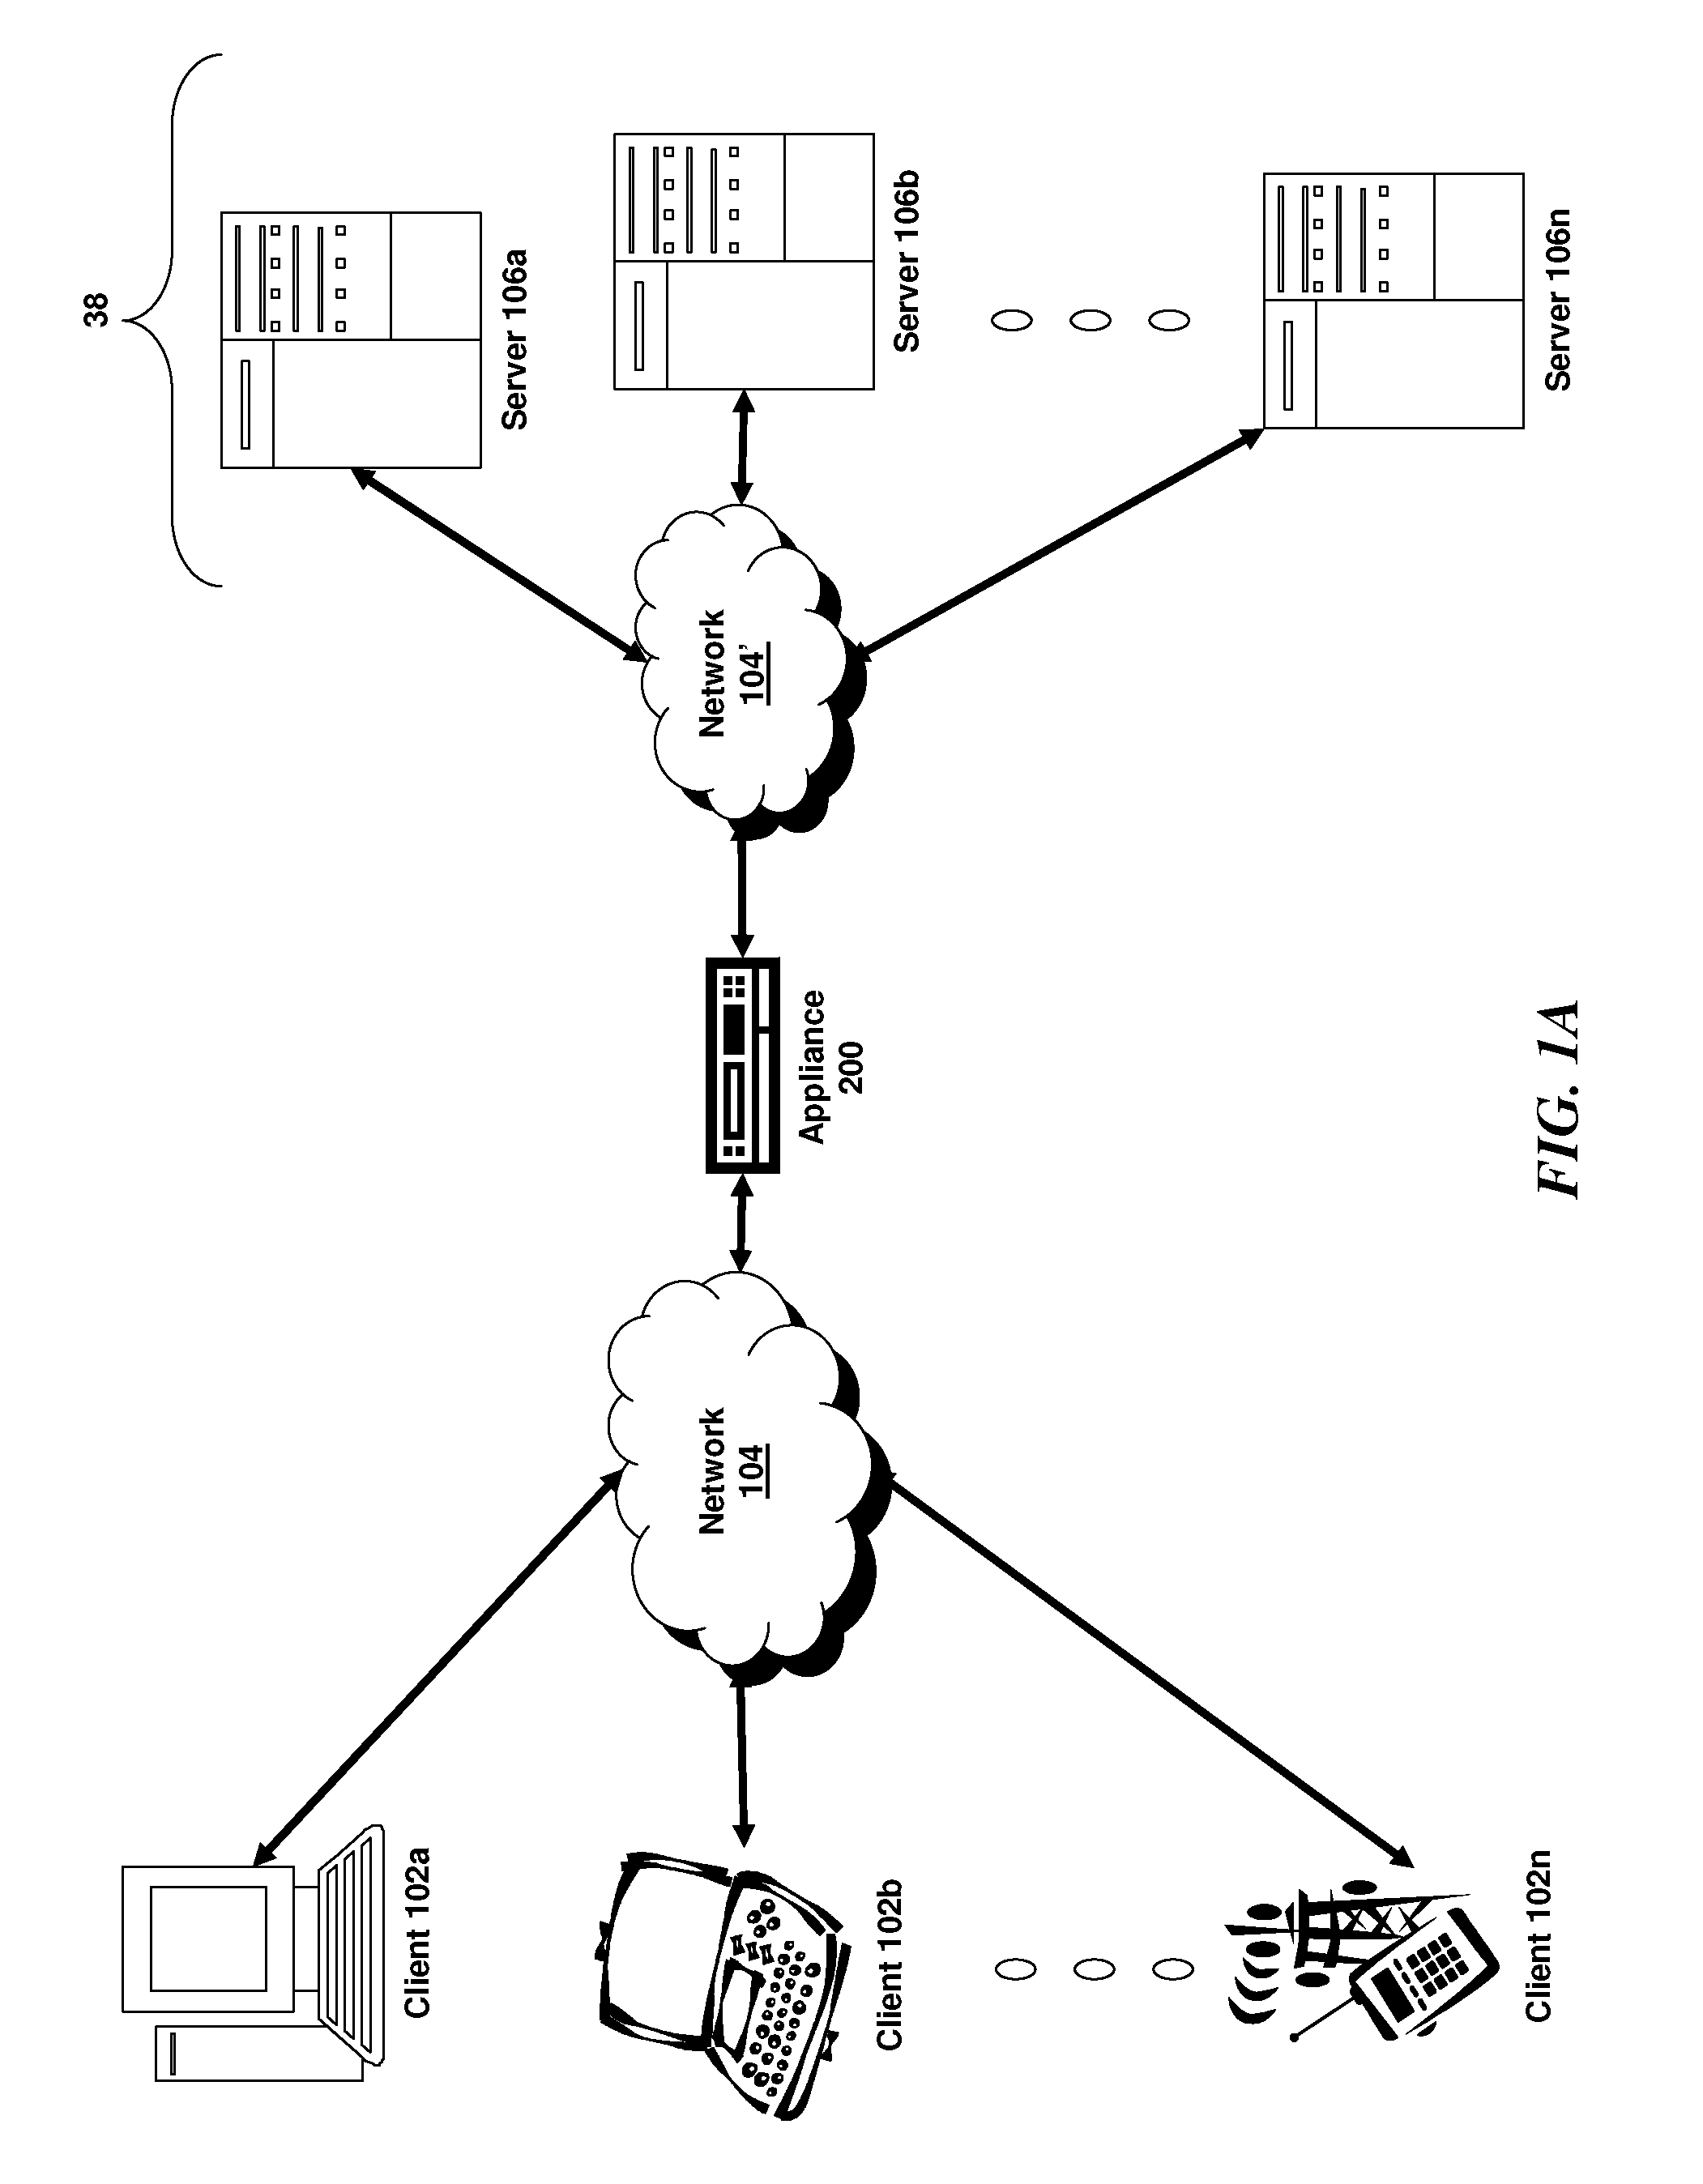 Systems and methods for distributed hash table in a multi-core system